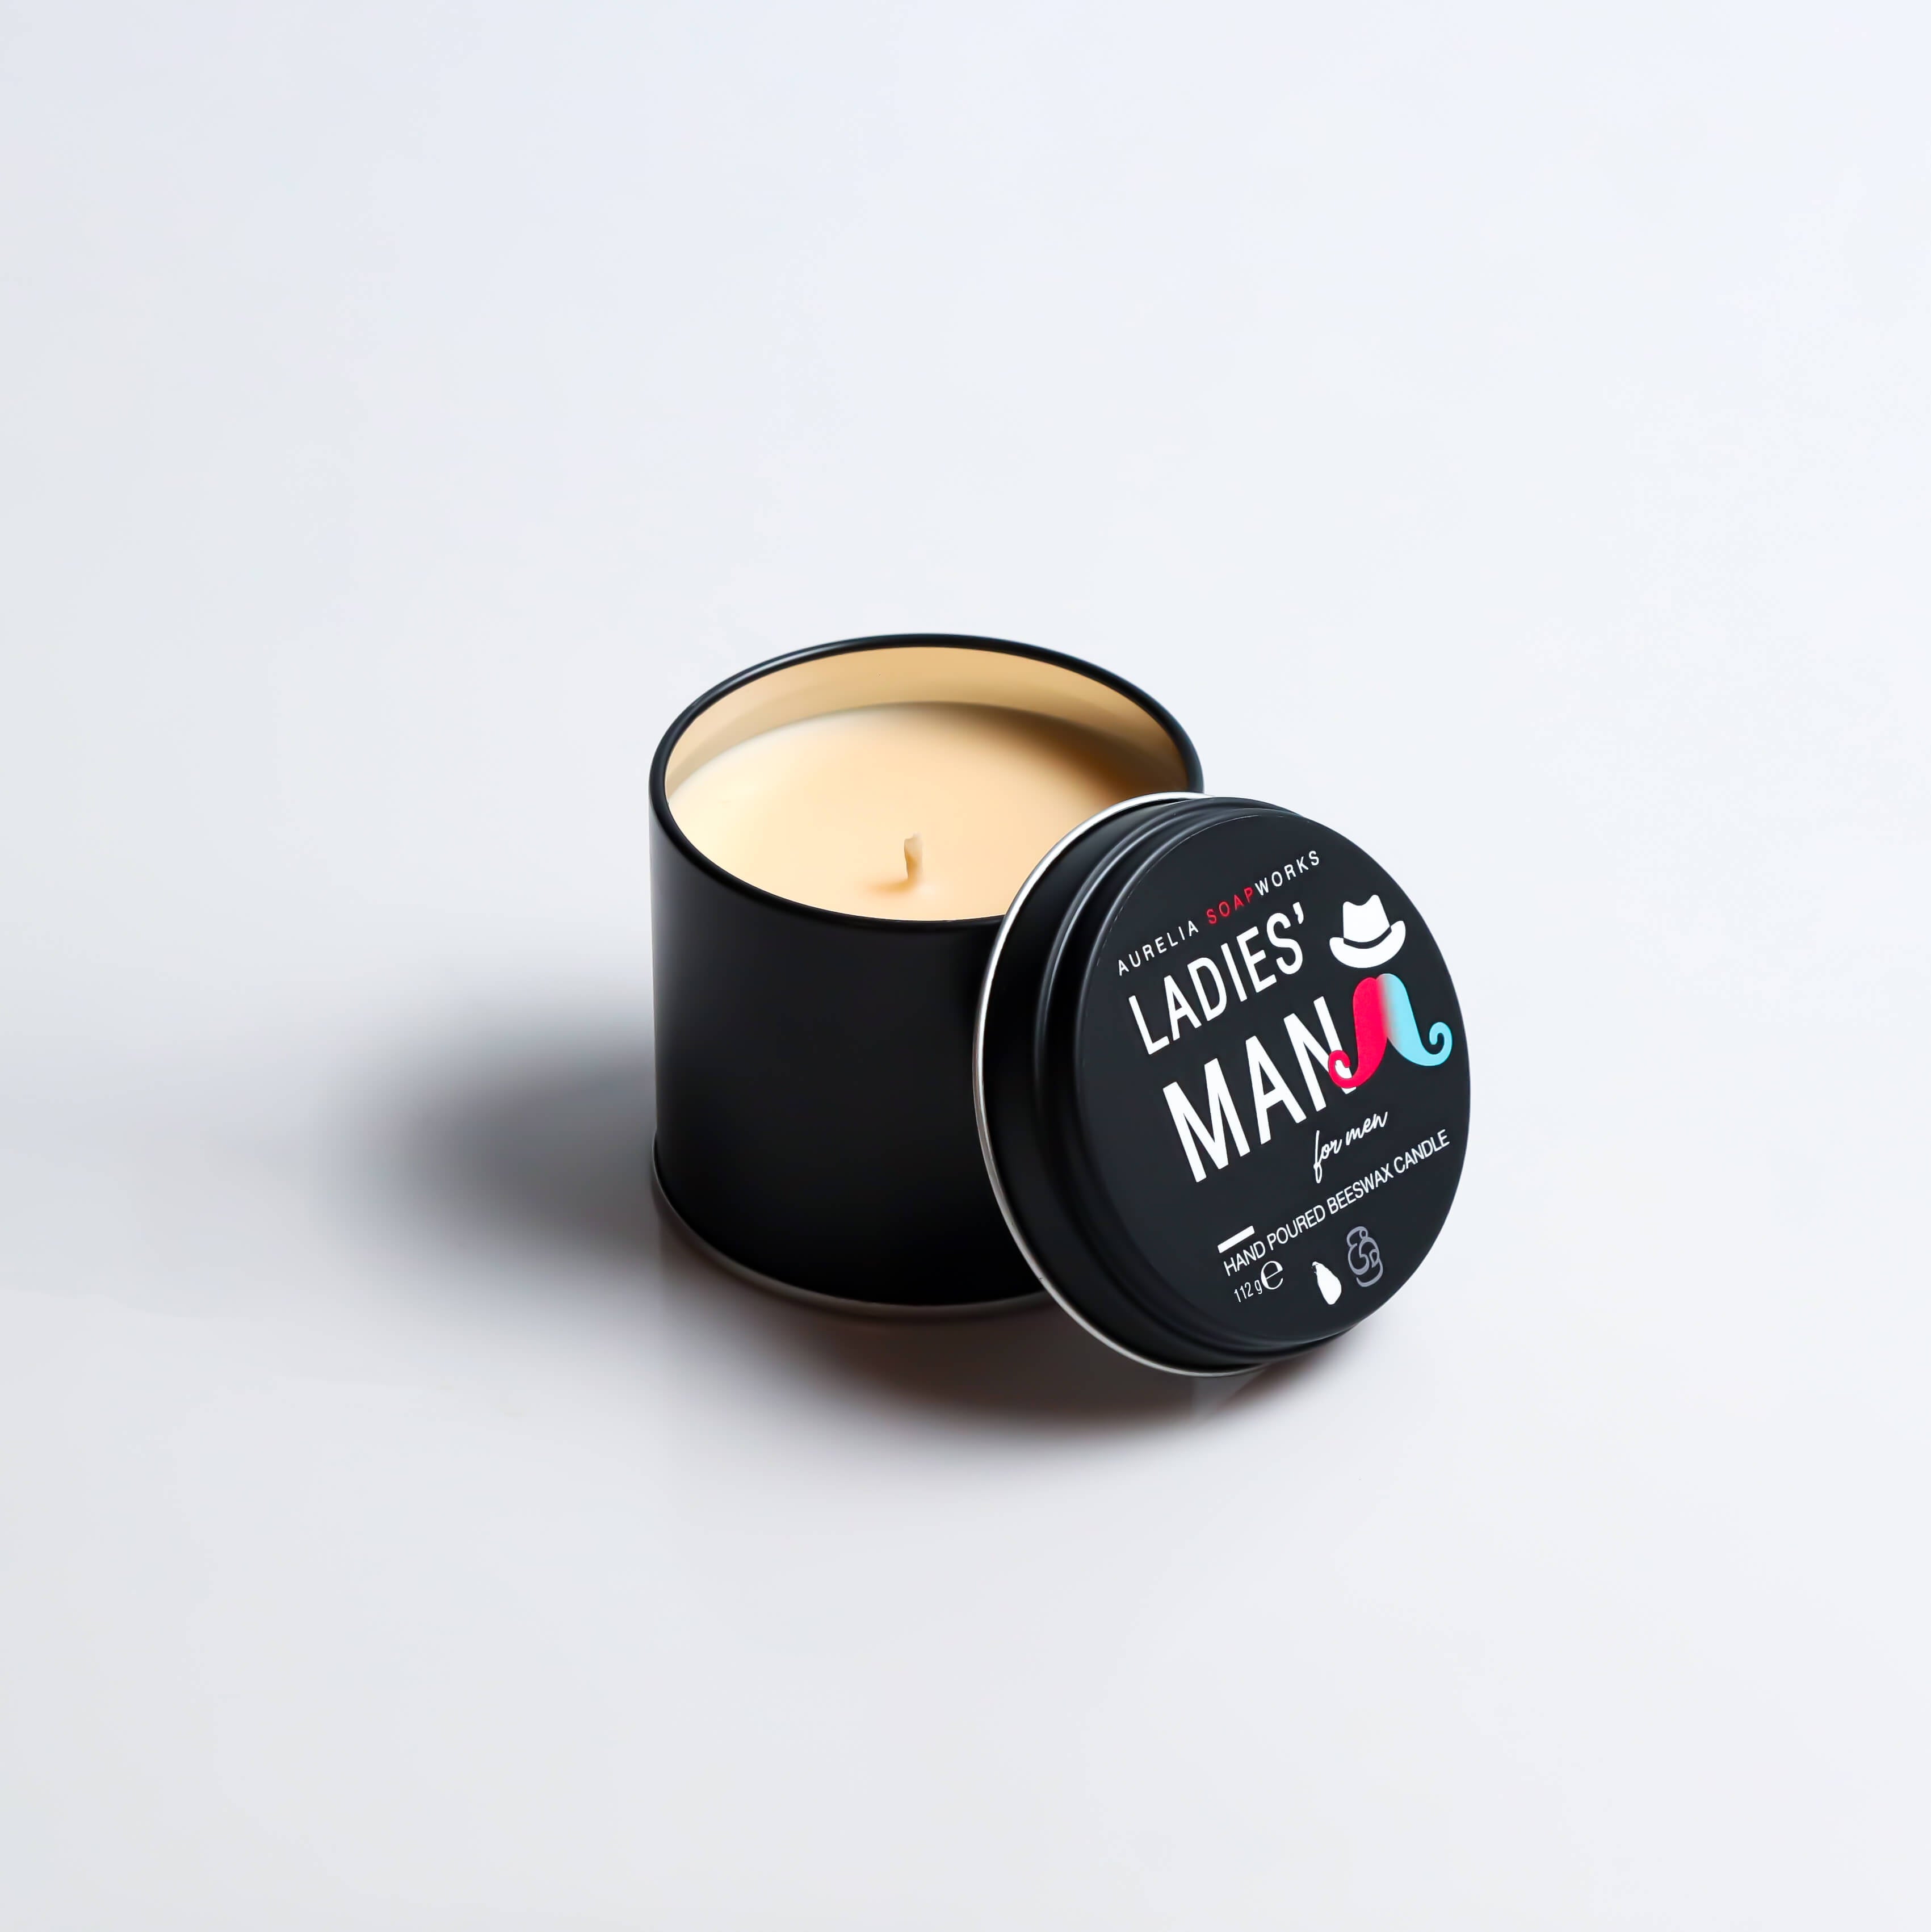 Ladies' Man Scented Candle